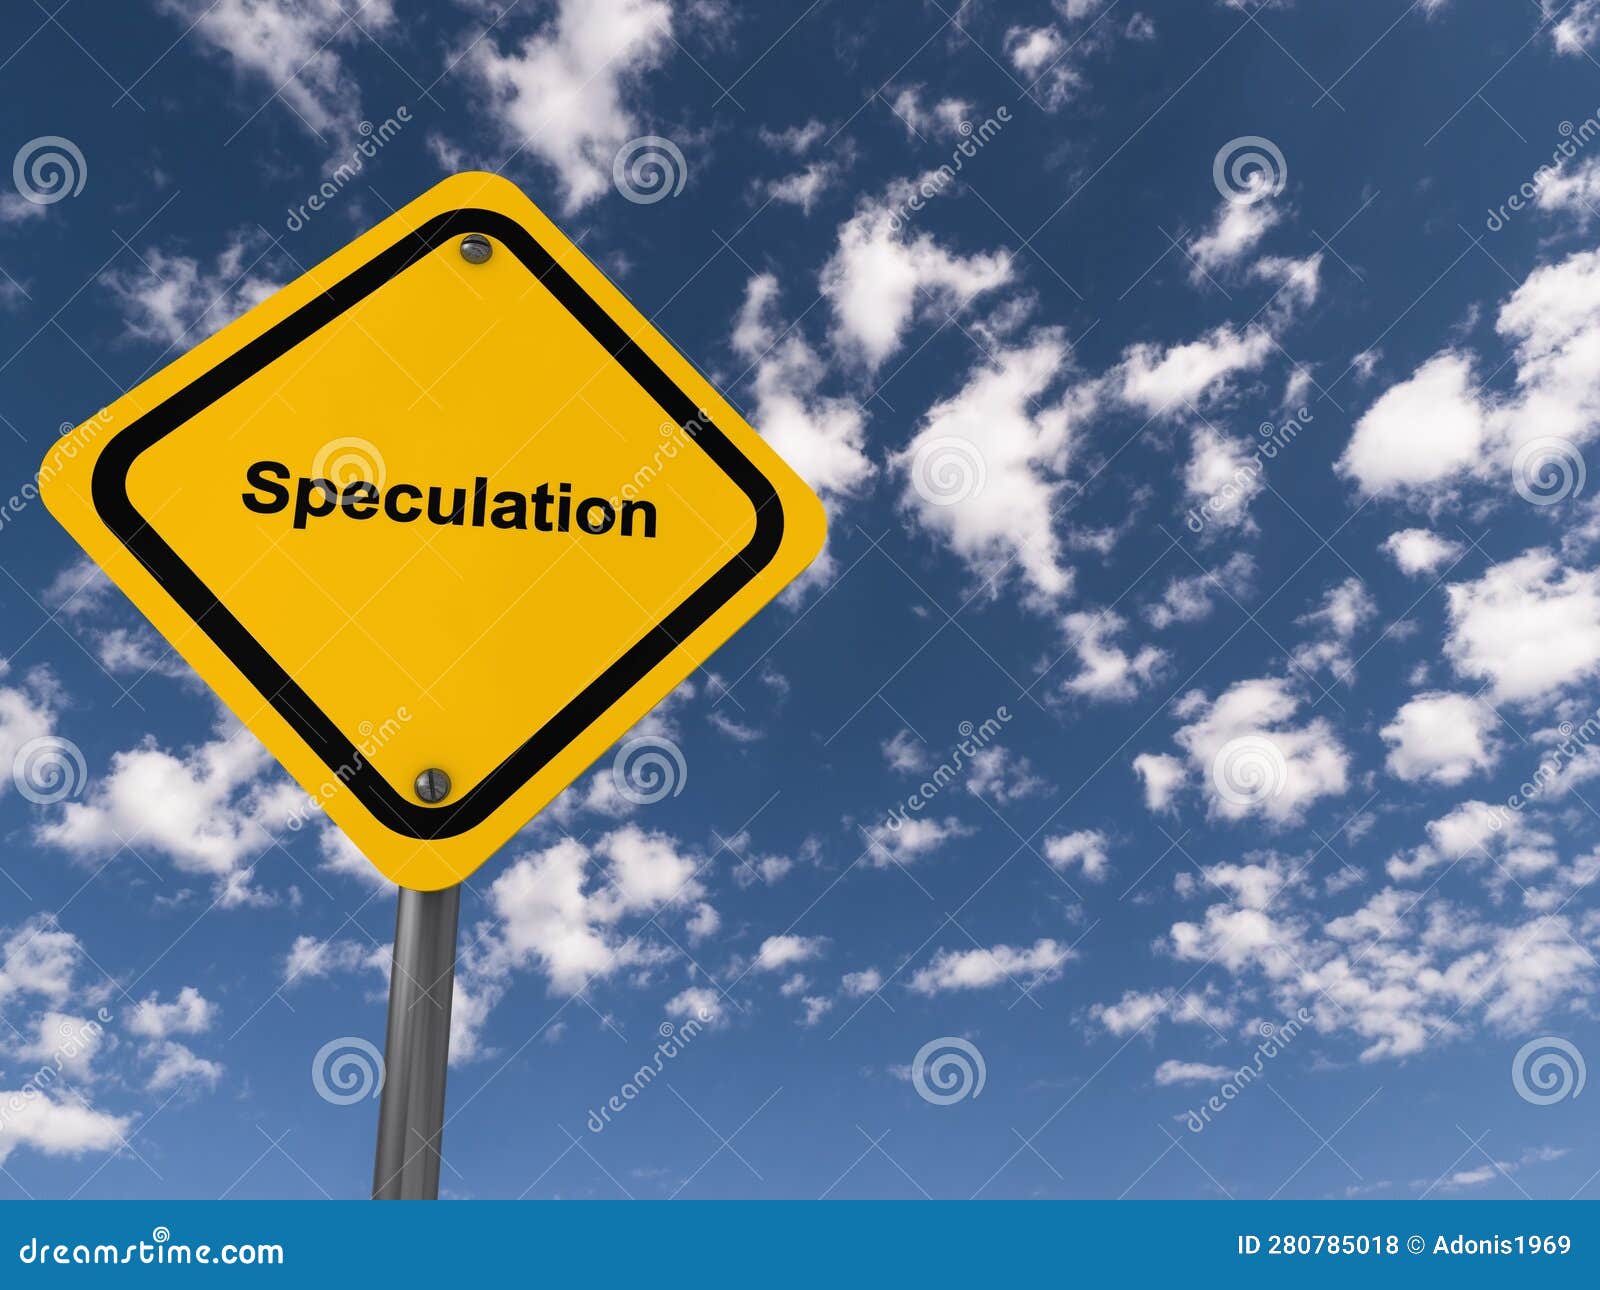 speculation traffic sign on blue sky